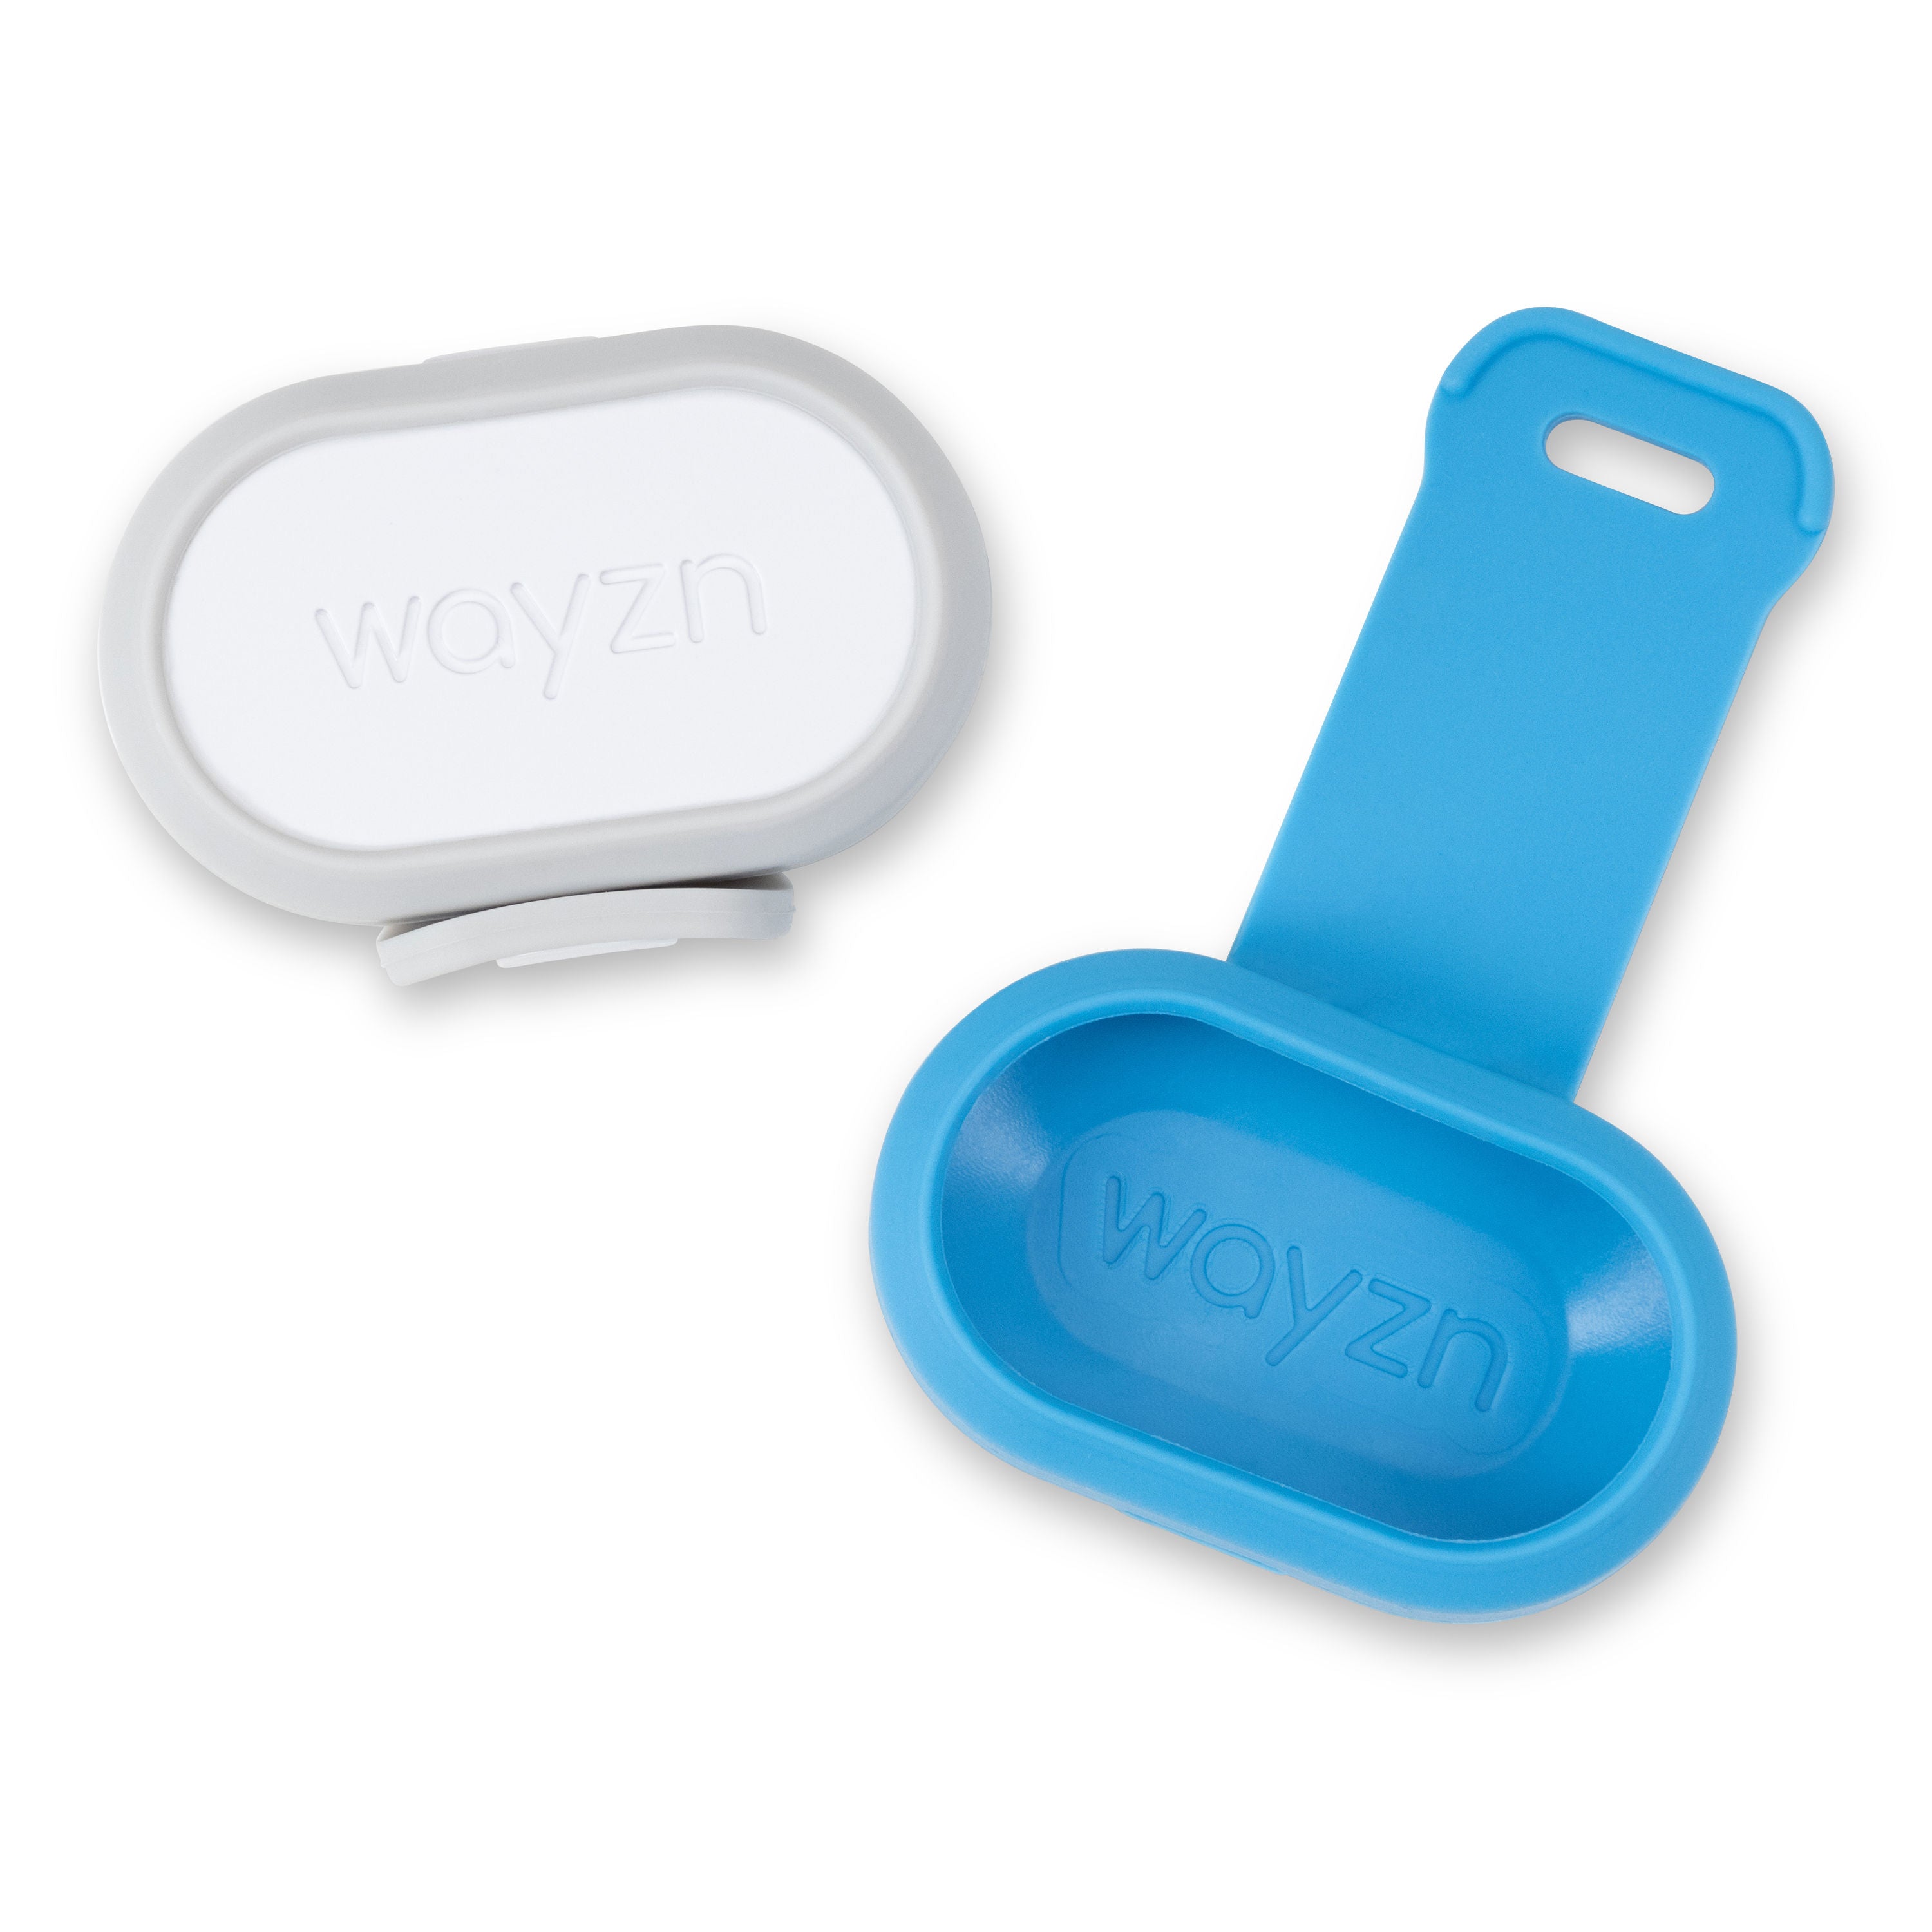 Wayzn Pet Tag straps come in two colors